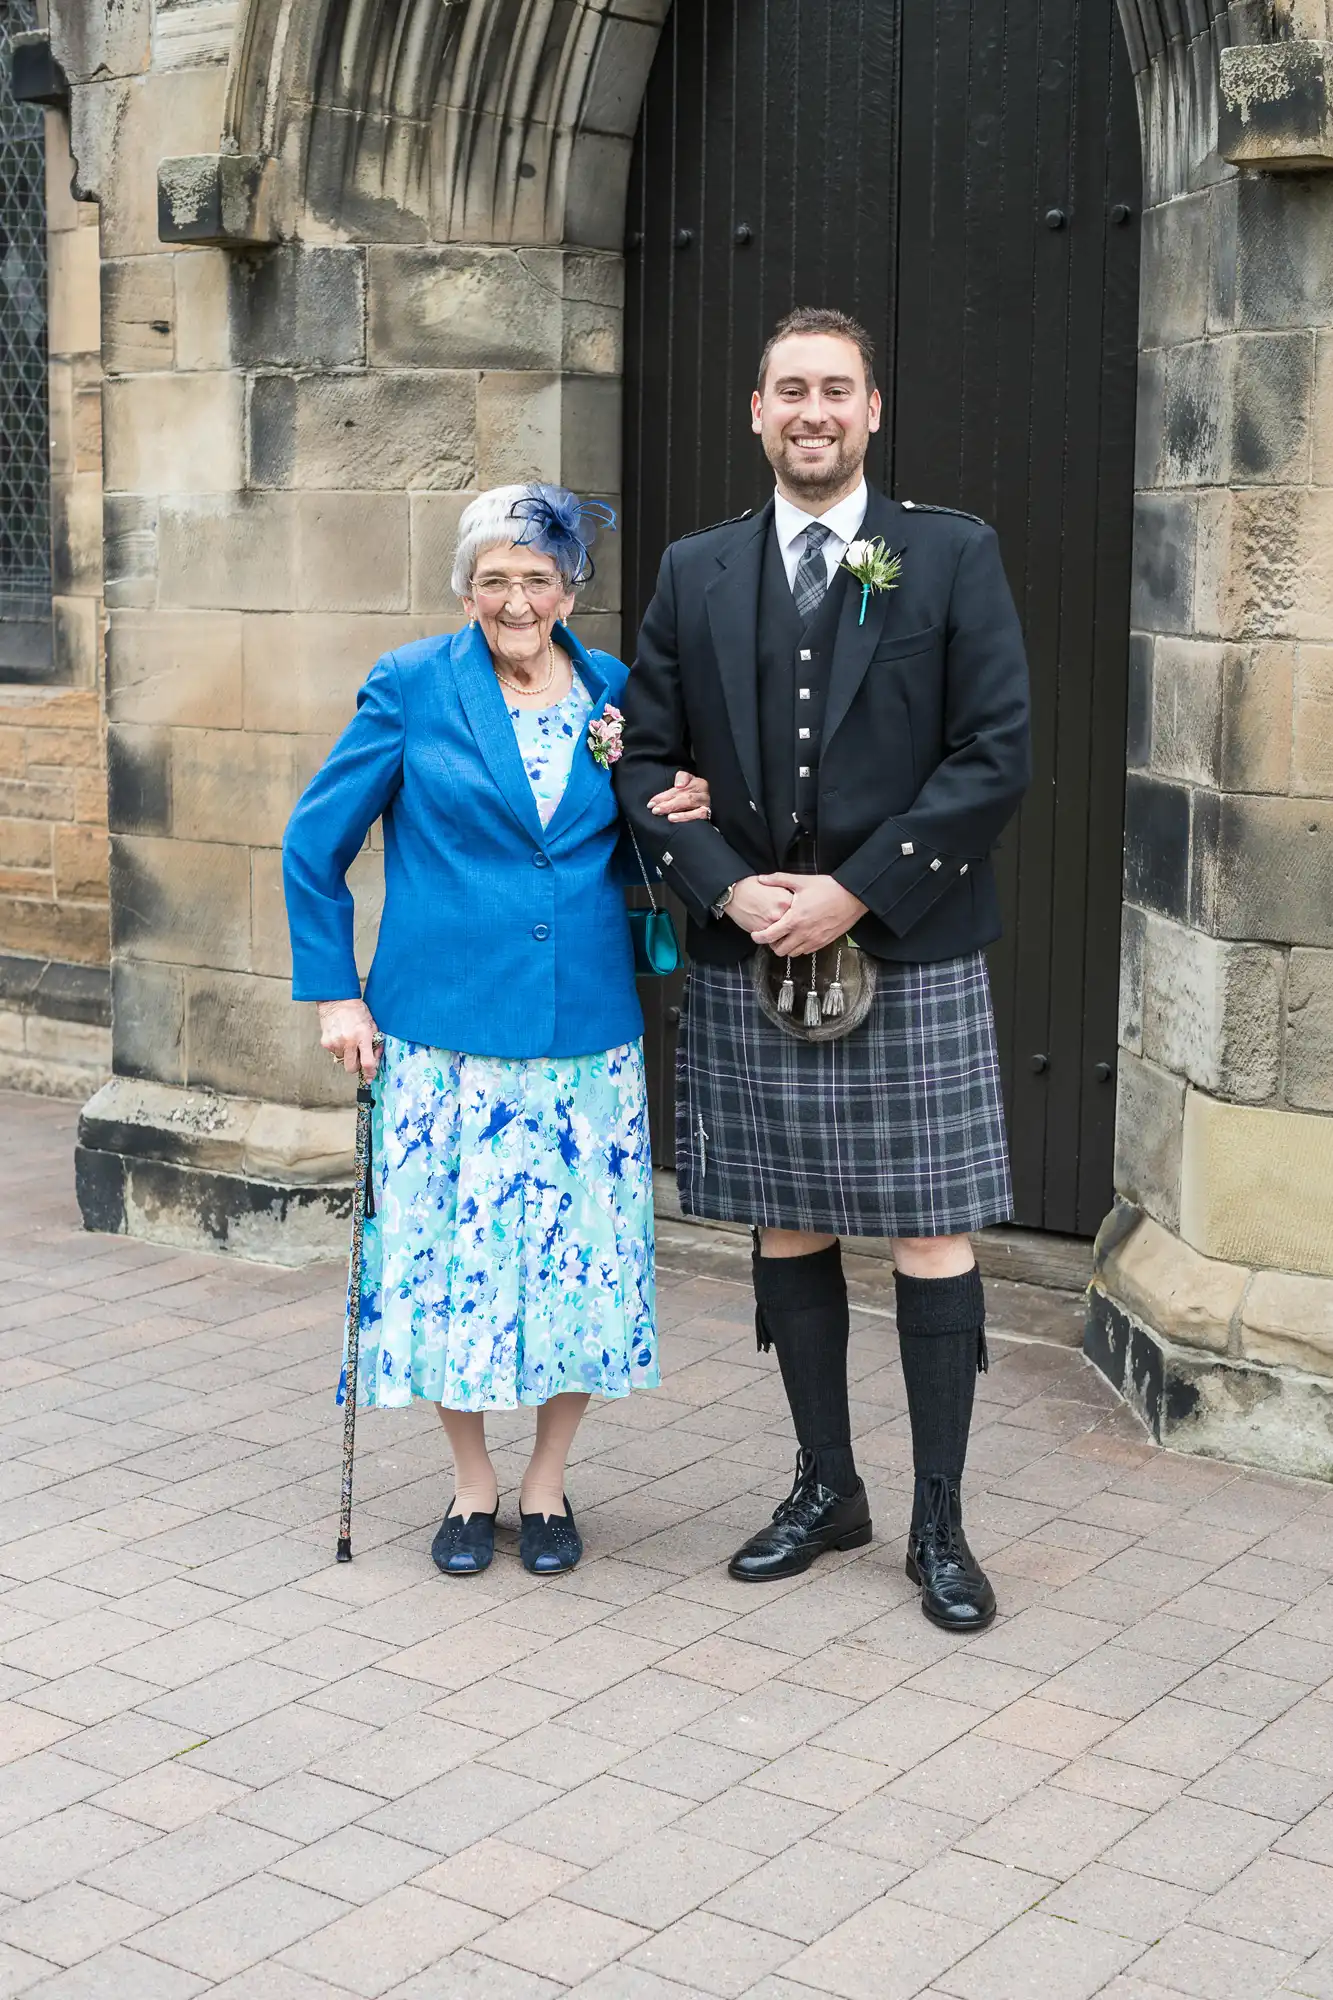 Elderly woman in blue jacket and floral dress with a younger man in traditional scottish kilt, both smiling outside a stone building.